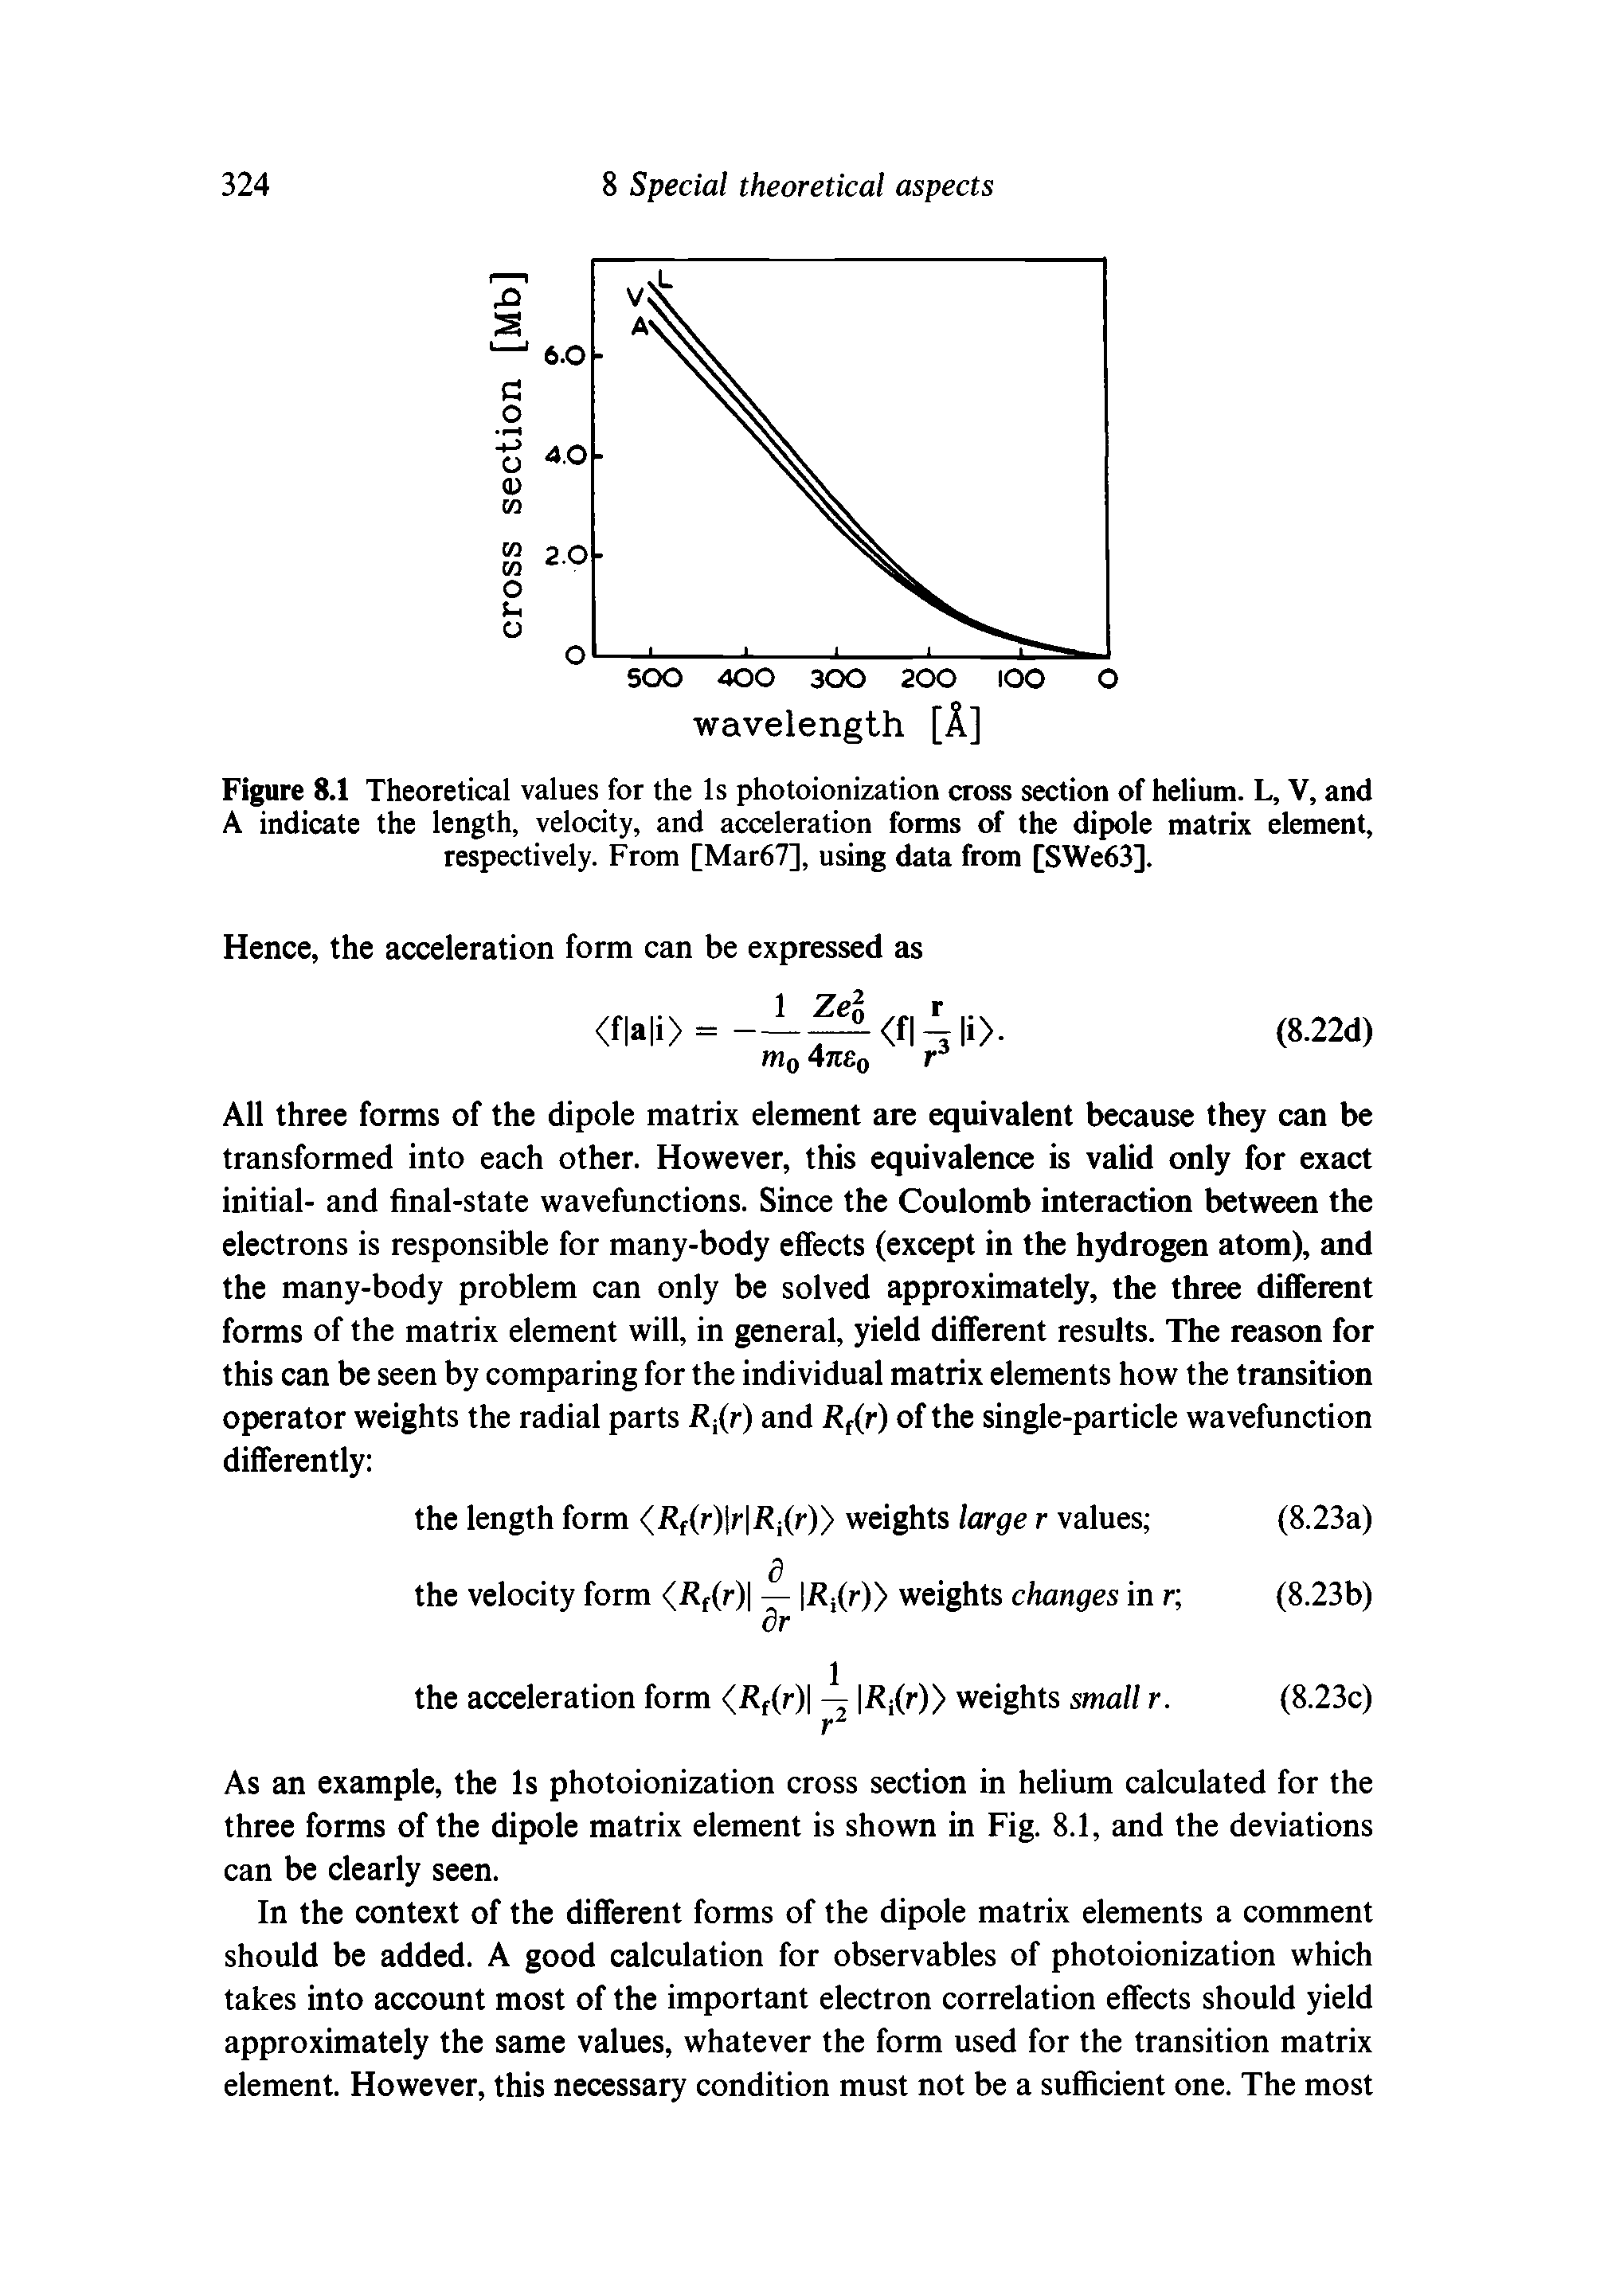 Figure 8.1 Theoretical values for the Is photoionization cross section of helium. L, V, and A indicate the length, velocity, and acceleration forms of the dipole matrix element, respectively. From [Mar67], using data from [SWe63].